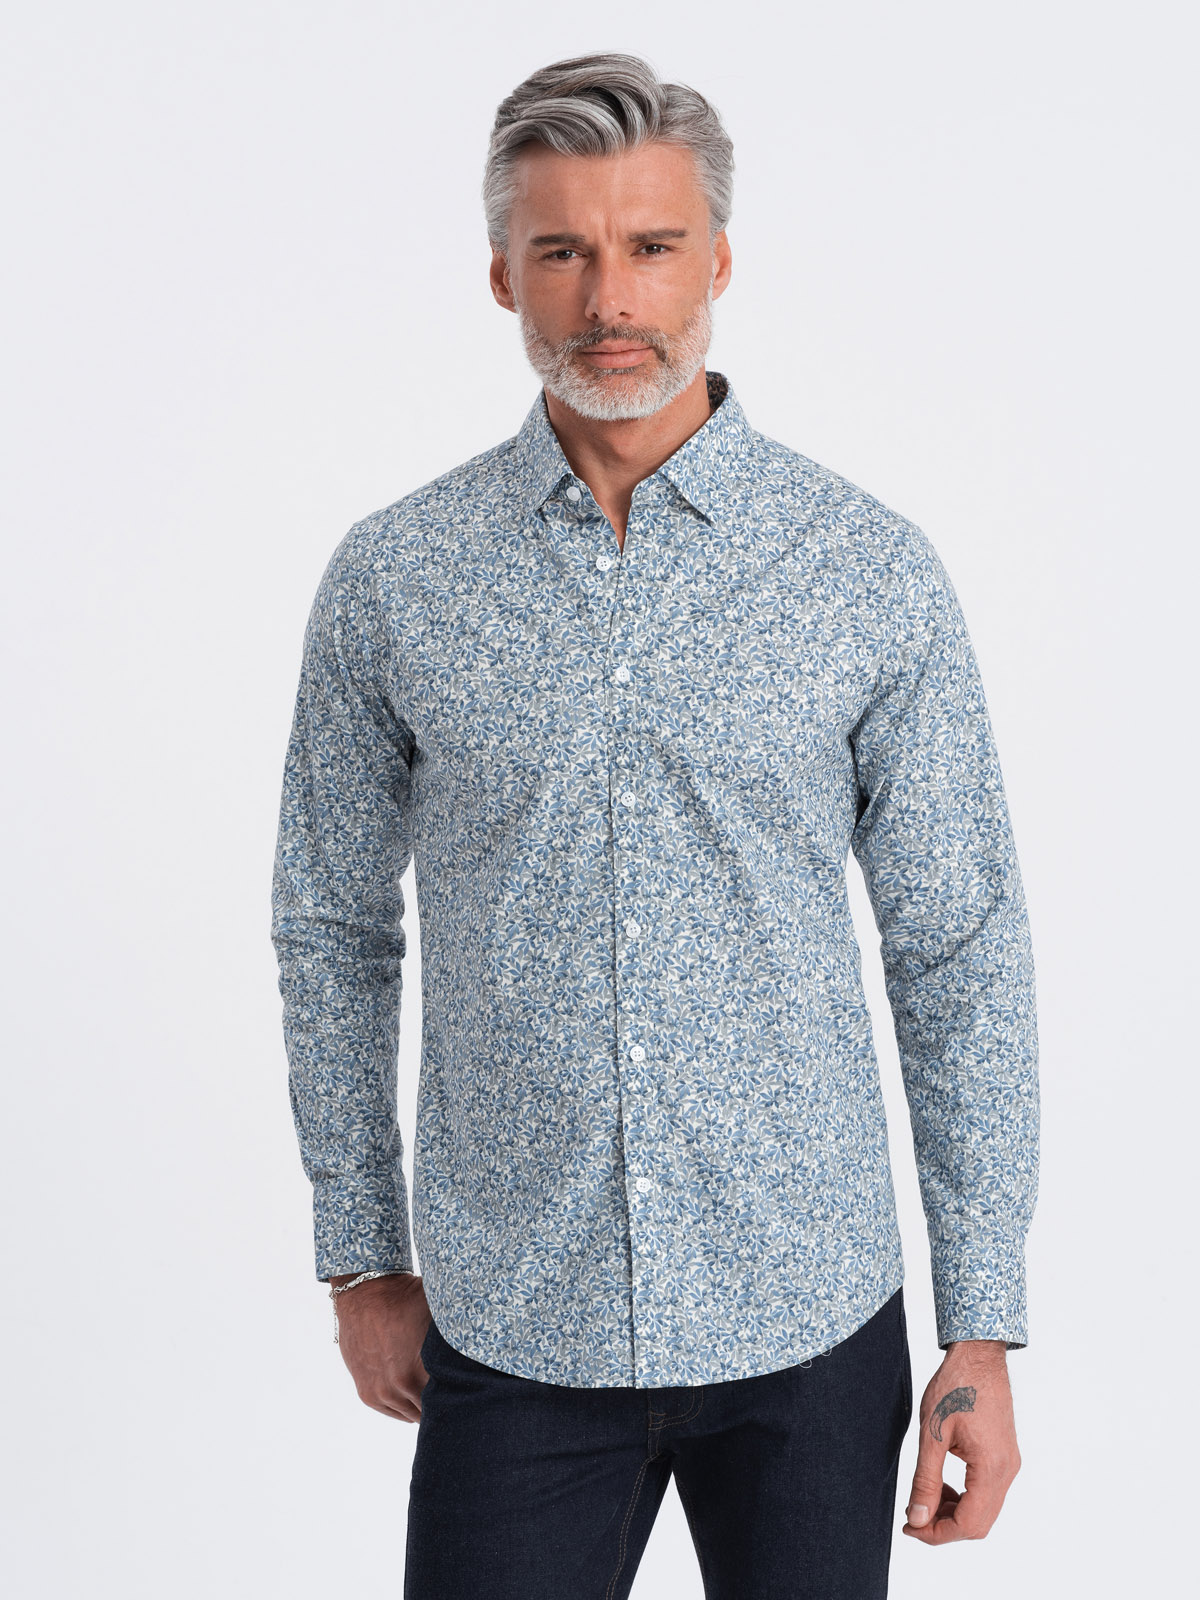 Ombre Men's SLIM FIT shirt in small leaf print - light blue